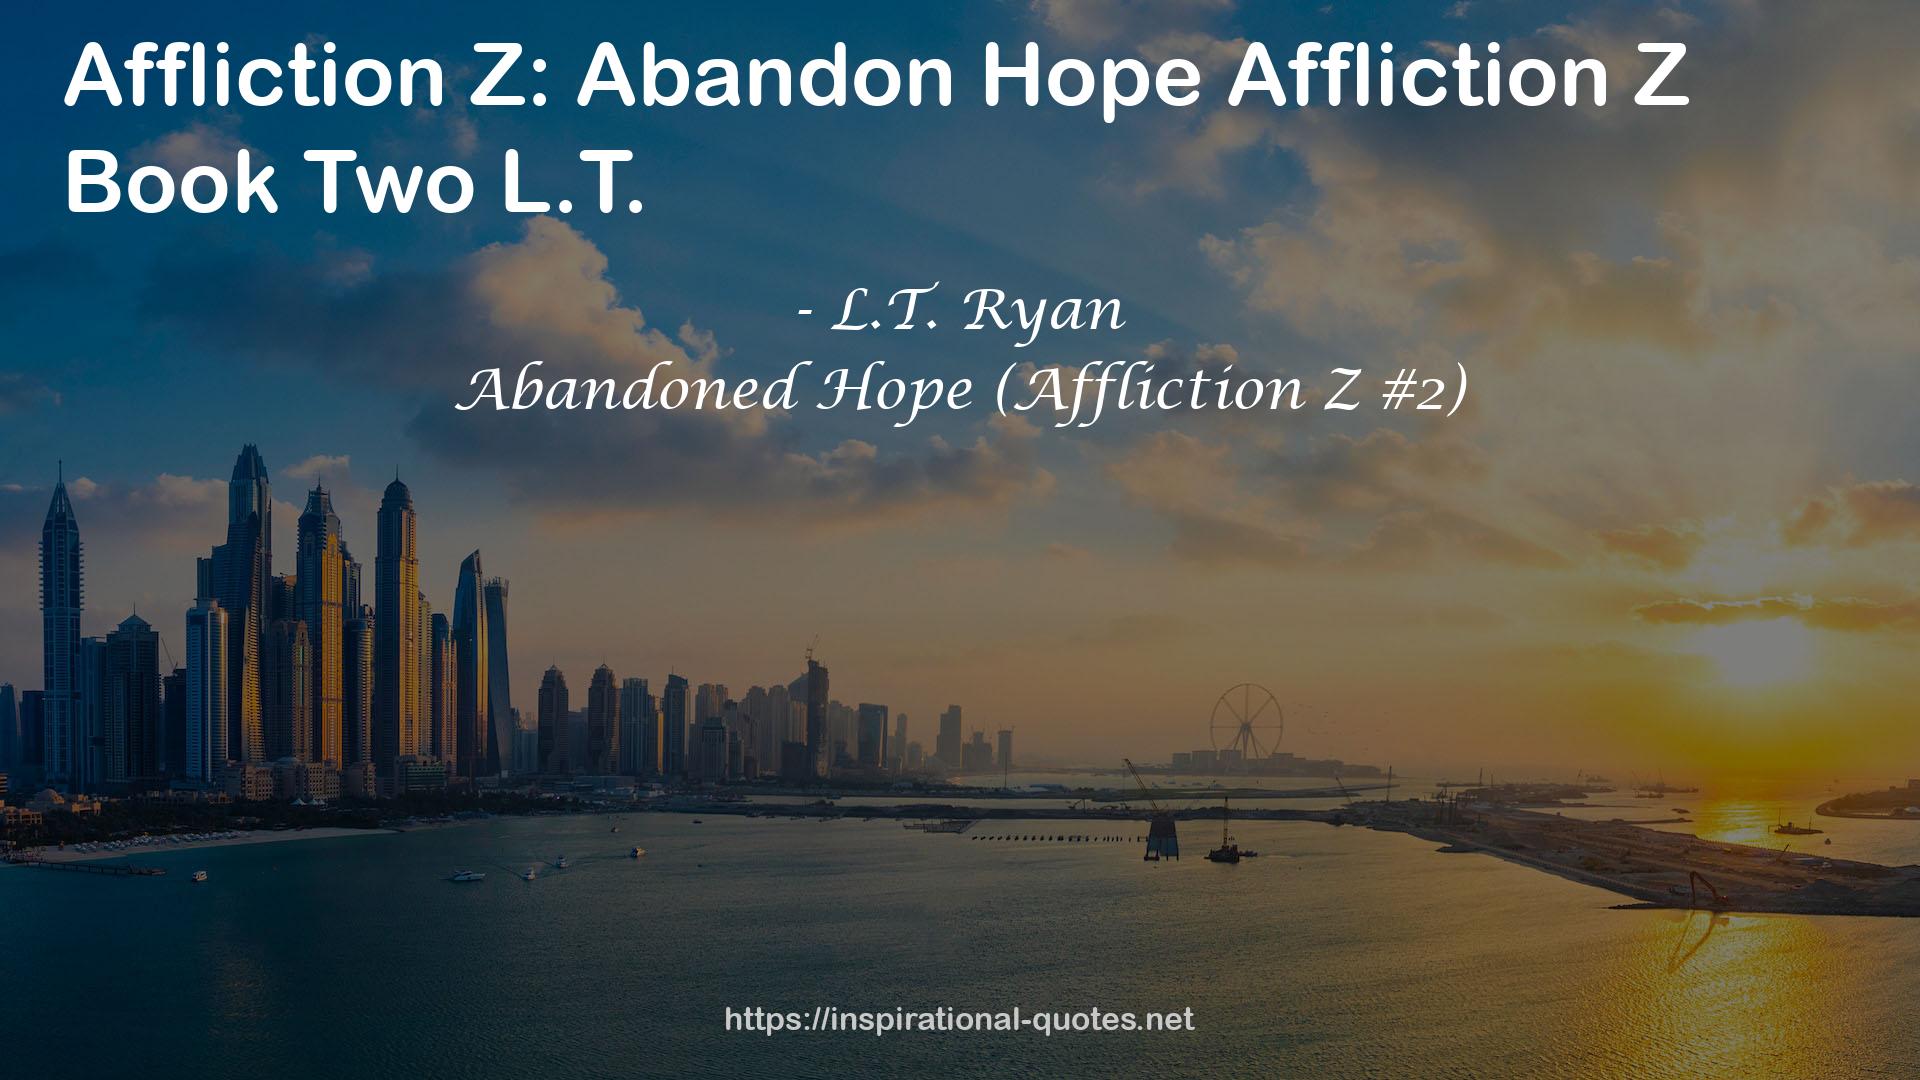 Abandoned Hope (Affliction Z #2) QUOTES